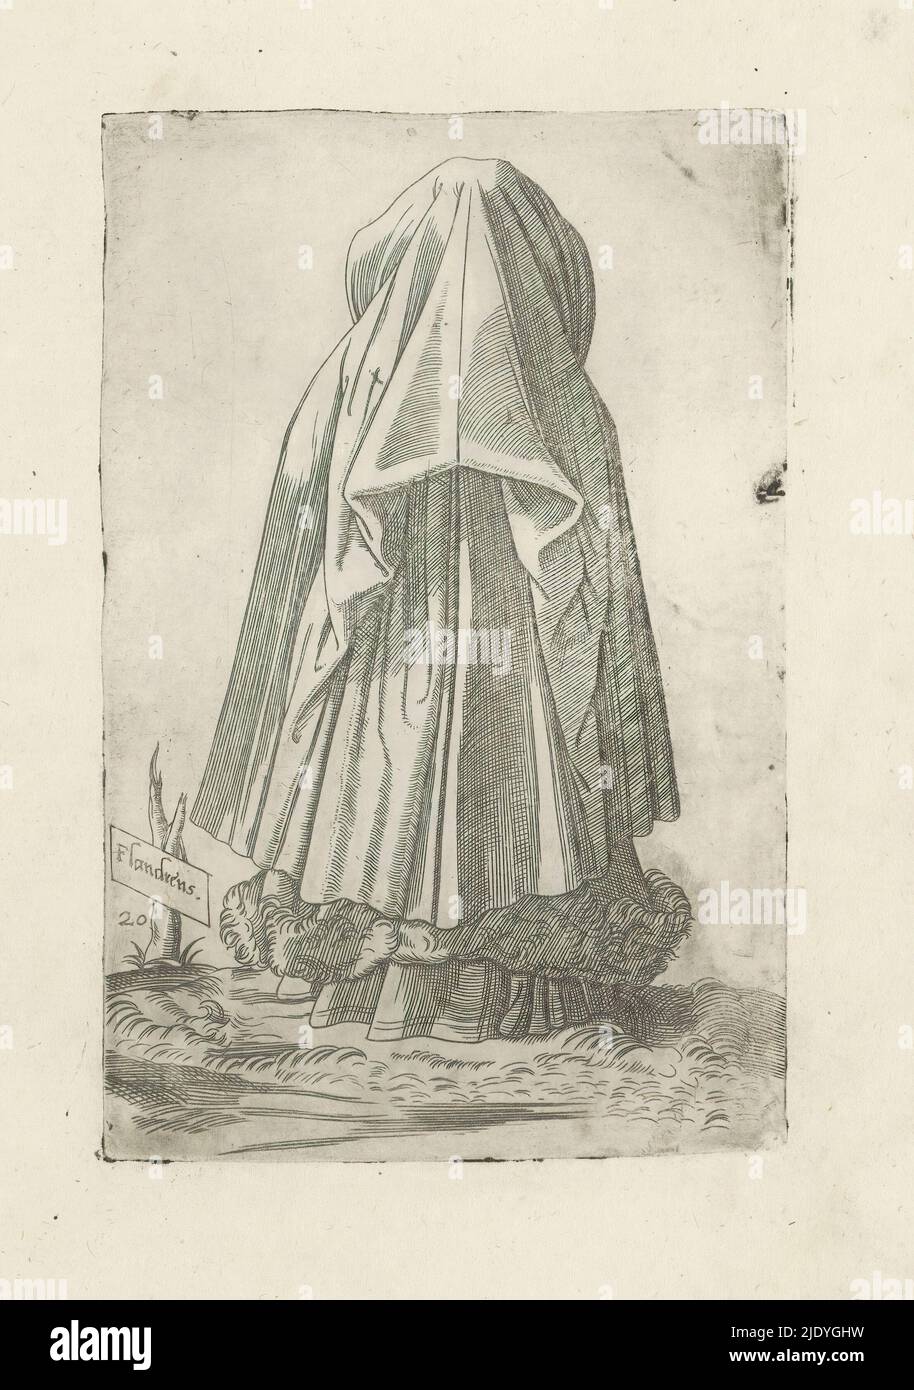 Woman from Flanders, wide cloak over head., Flandrens (title on object), Omnium fere gentium nostrae aetatis habitus, nunquam ante hac aediti (series title), Woman from Flanders seen from back, dressed in long robe with fur trim, over which cloak falls down over head. Part of the costume book entitled 'Omnium fere gentium nostrae aetatis habitus, nunquam ante hac aediti', Venice 1569. Reissue from 1569 of the first edition from 1563., print maker: Ferando Bertelli, after print by: Enea Vico, publisher: Ferando Bertelli, Venice, 1569,  Deze prent in tweevoud ingebo, :, engraving, height 265 mm Stock Photo